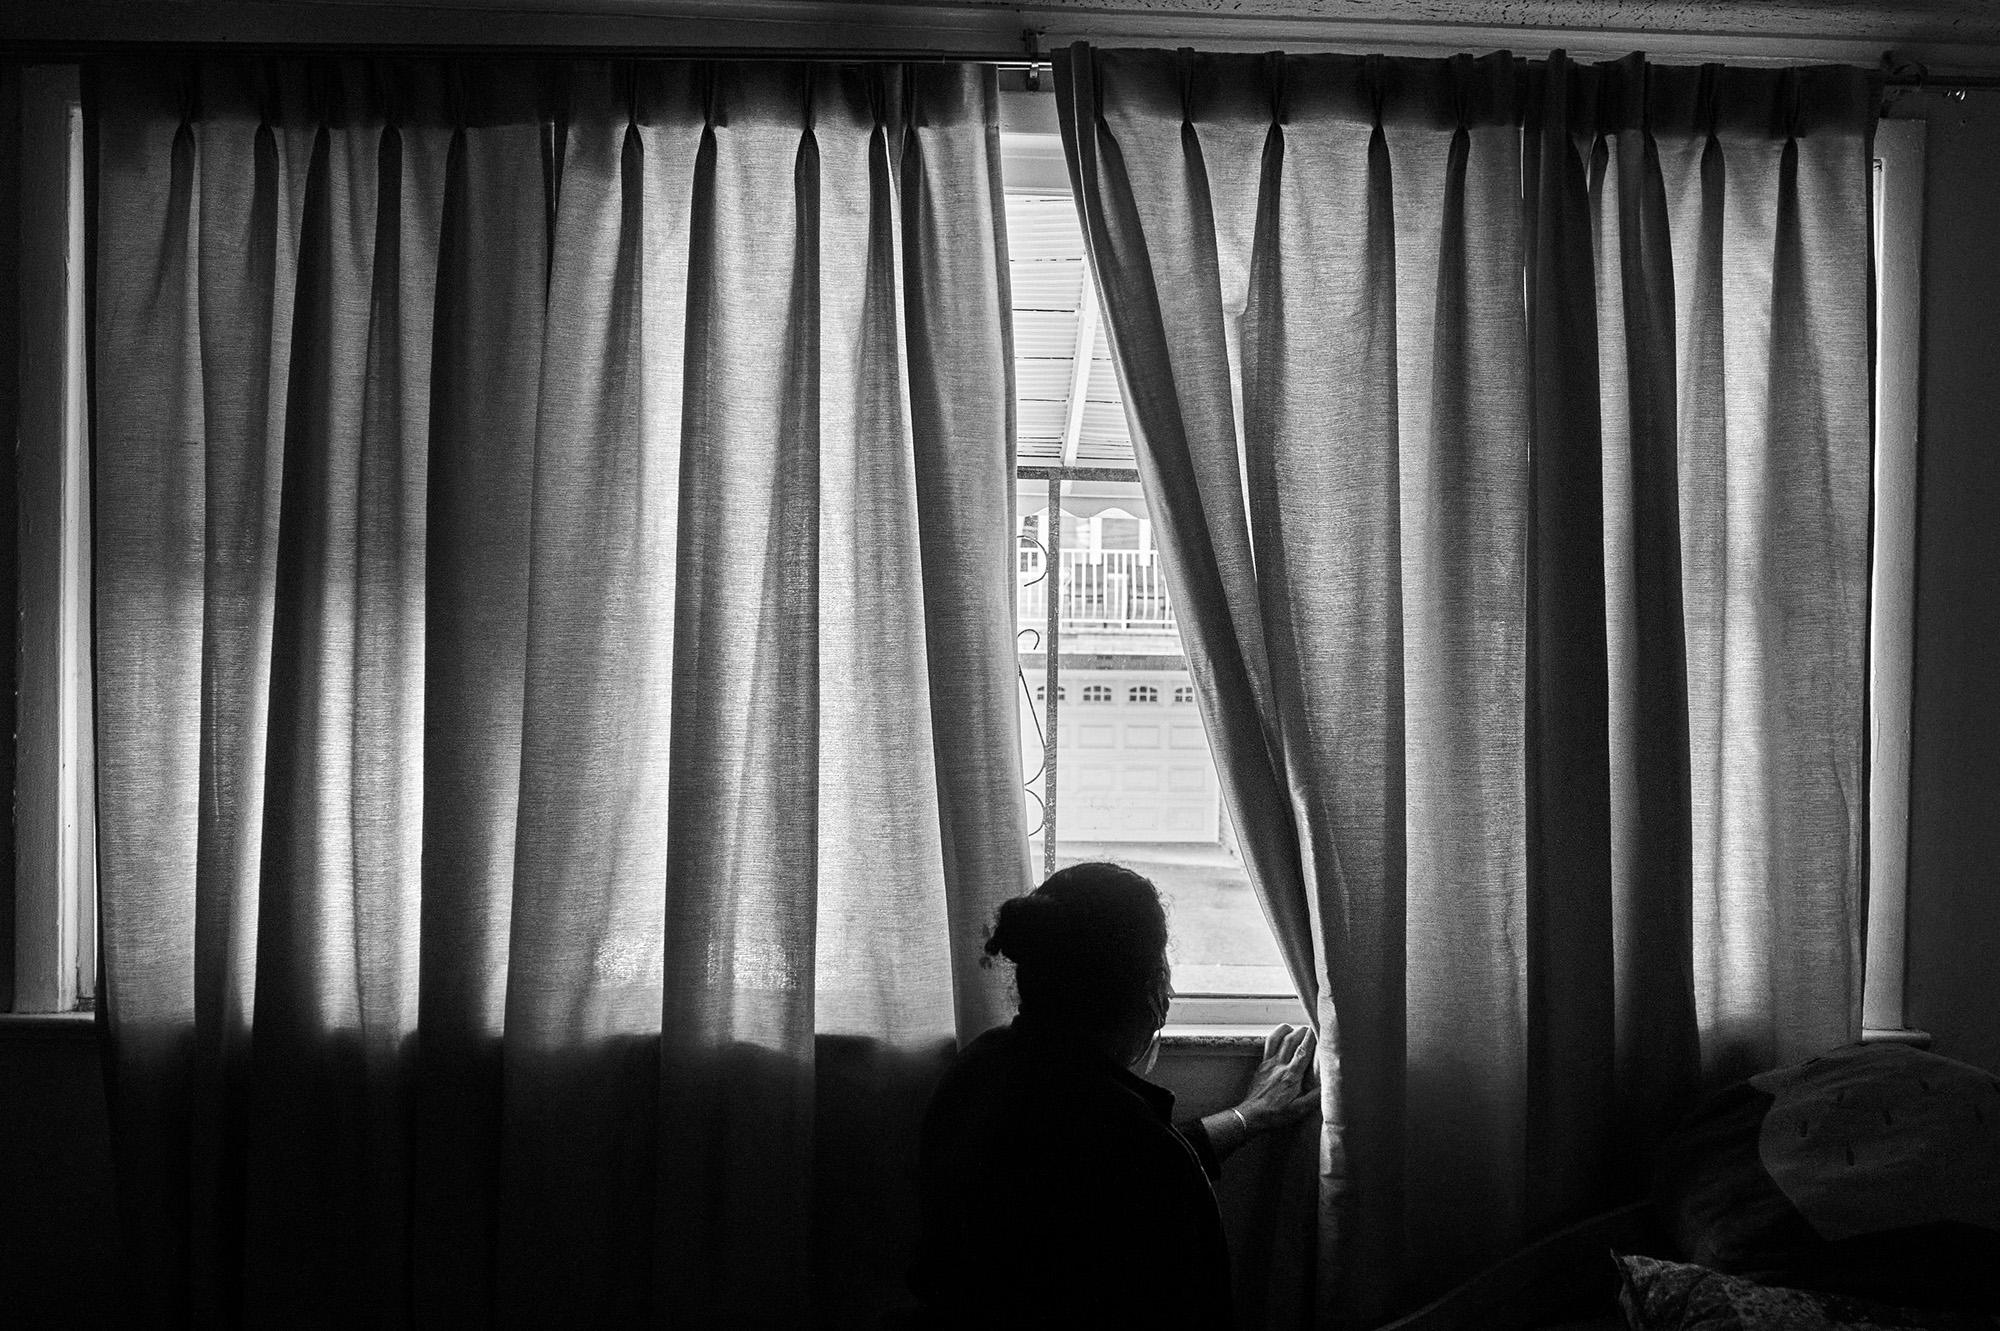 Nidia Portillo looks out the window of the room she shares with her autistic daughter in New Jersey. Born in El Salvador, Nidia moved to the United States in 1994 and raised her children here with her husband Aquilino. During the Covid-19 pandemic, 13 people lived in her home. They all got sick. Photo: Edu Ponces/Ruido Photo